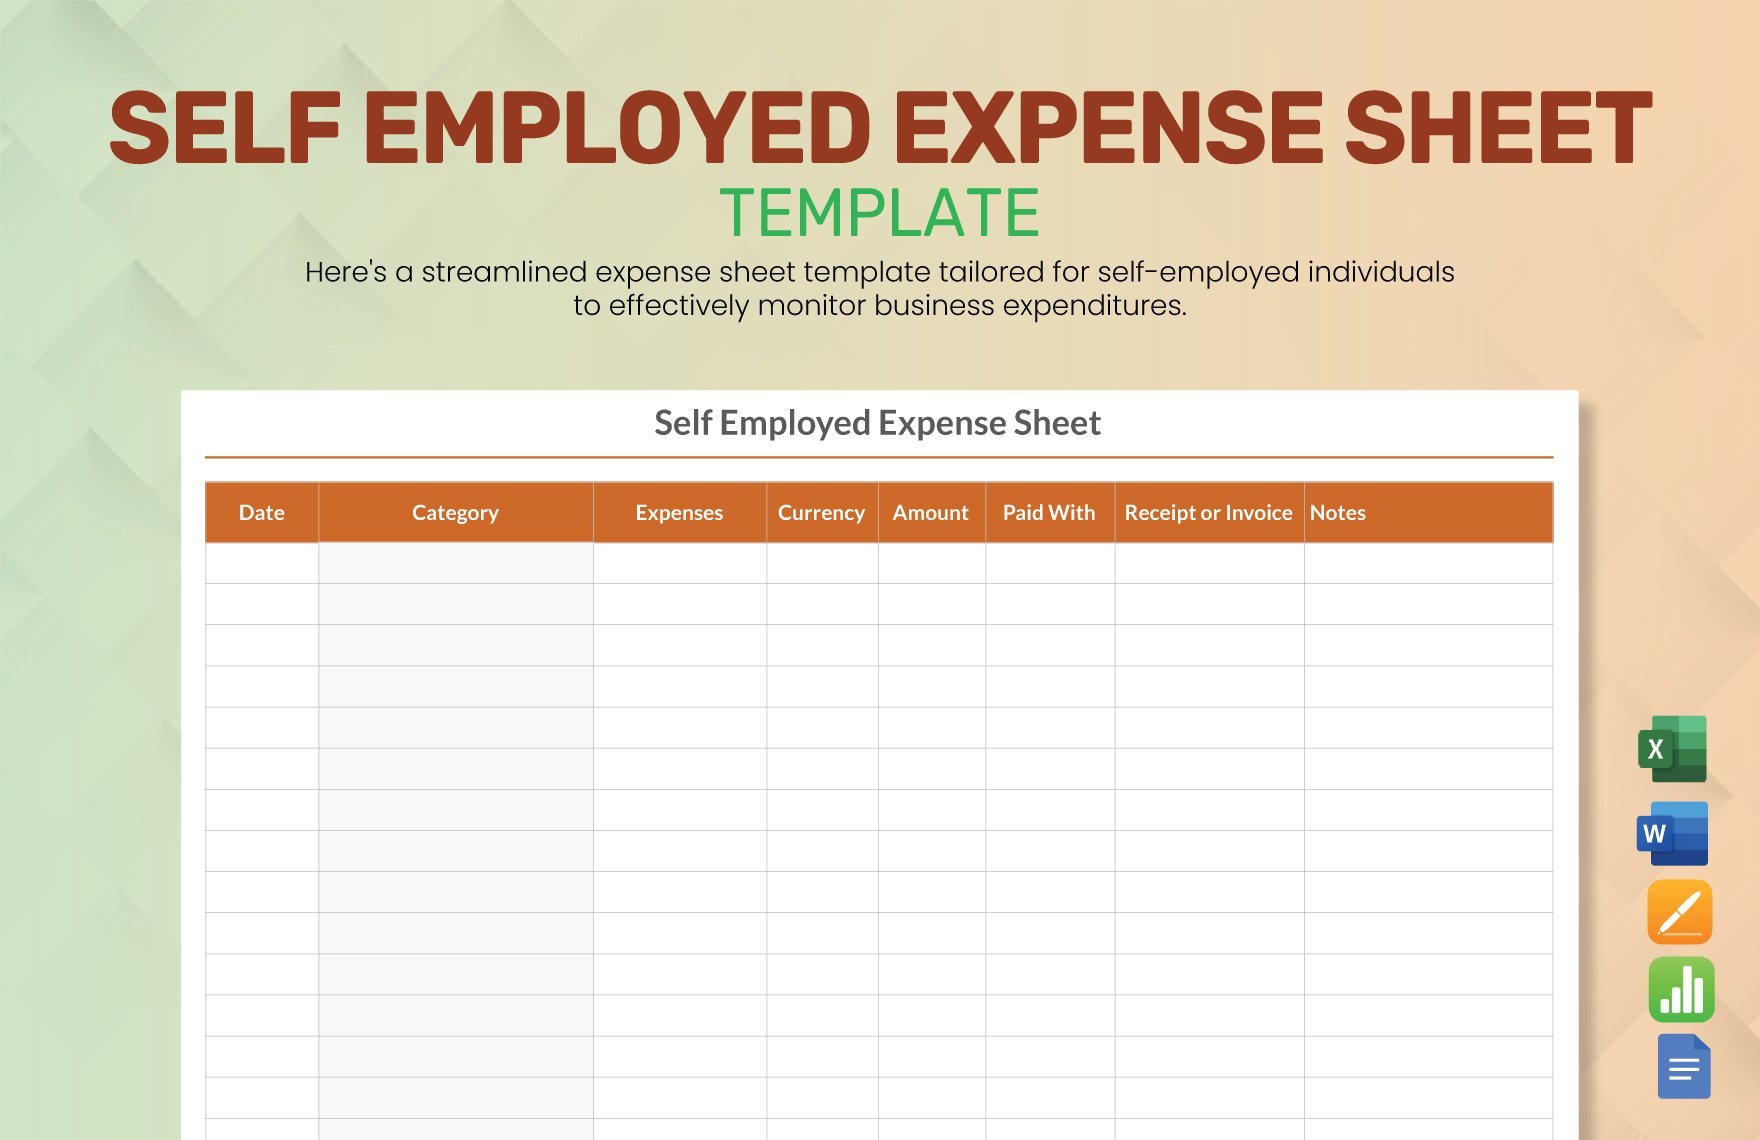 Self Employed Expense Sheet Template in Word, Google Docs, Excel, Apple Pages, Apple Numbers